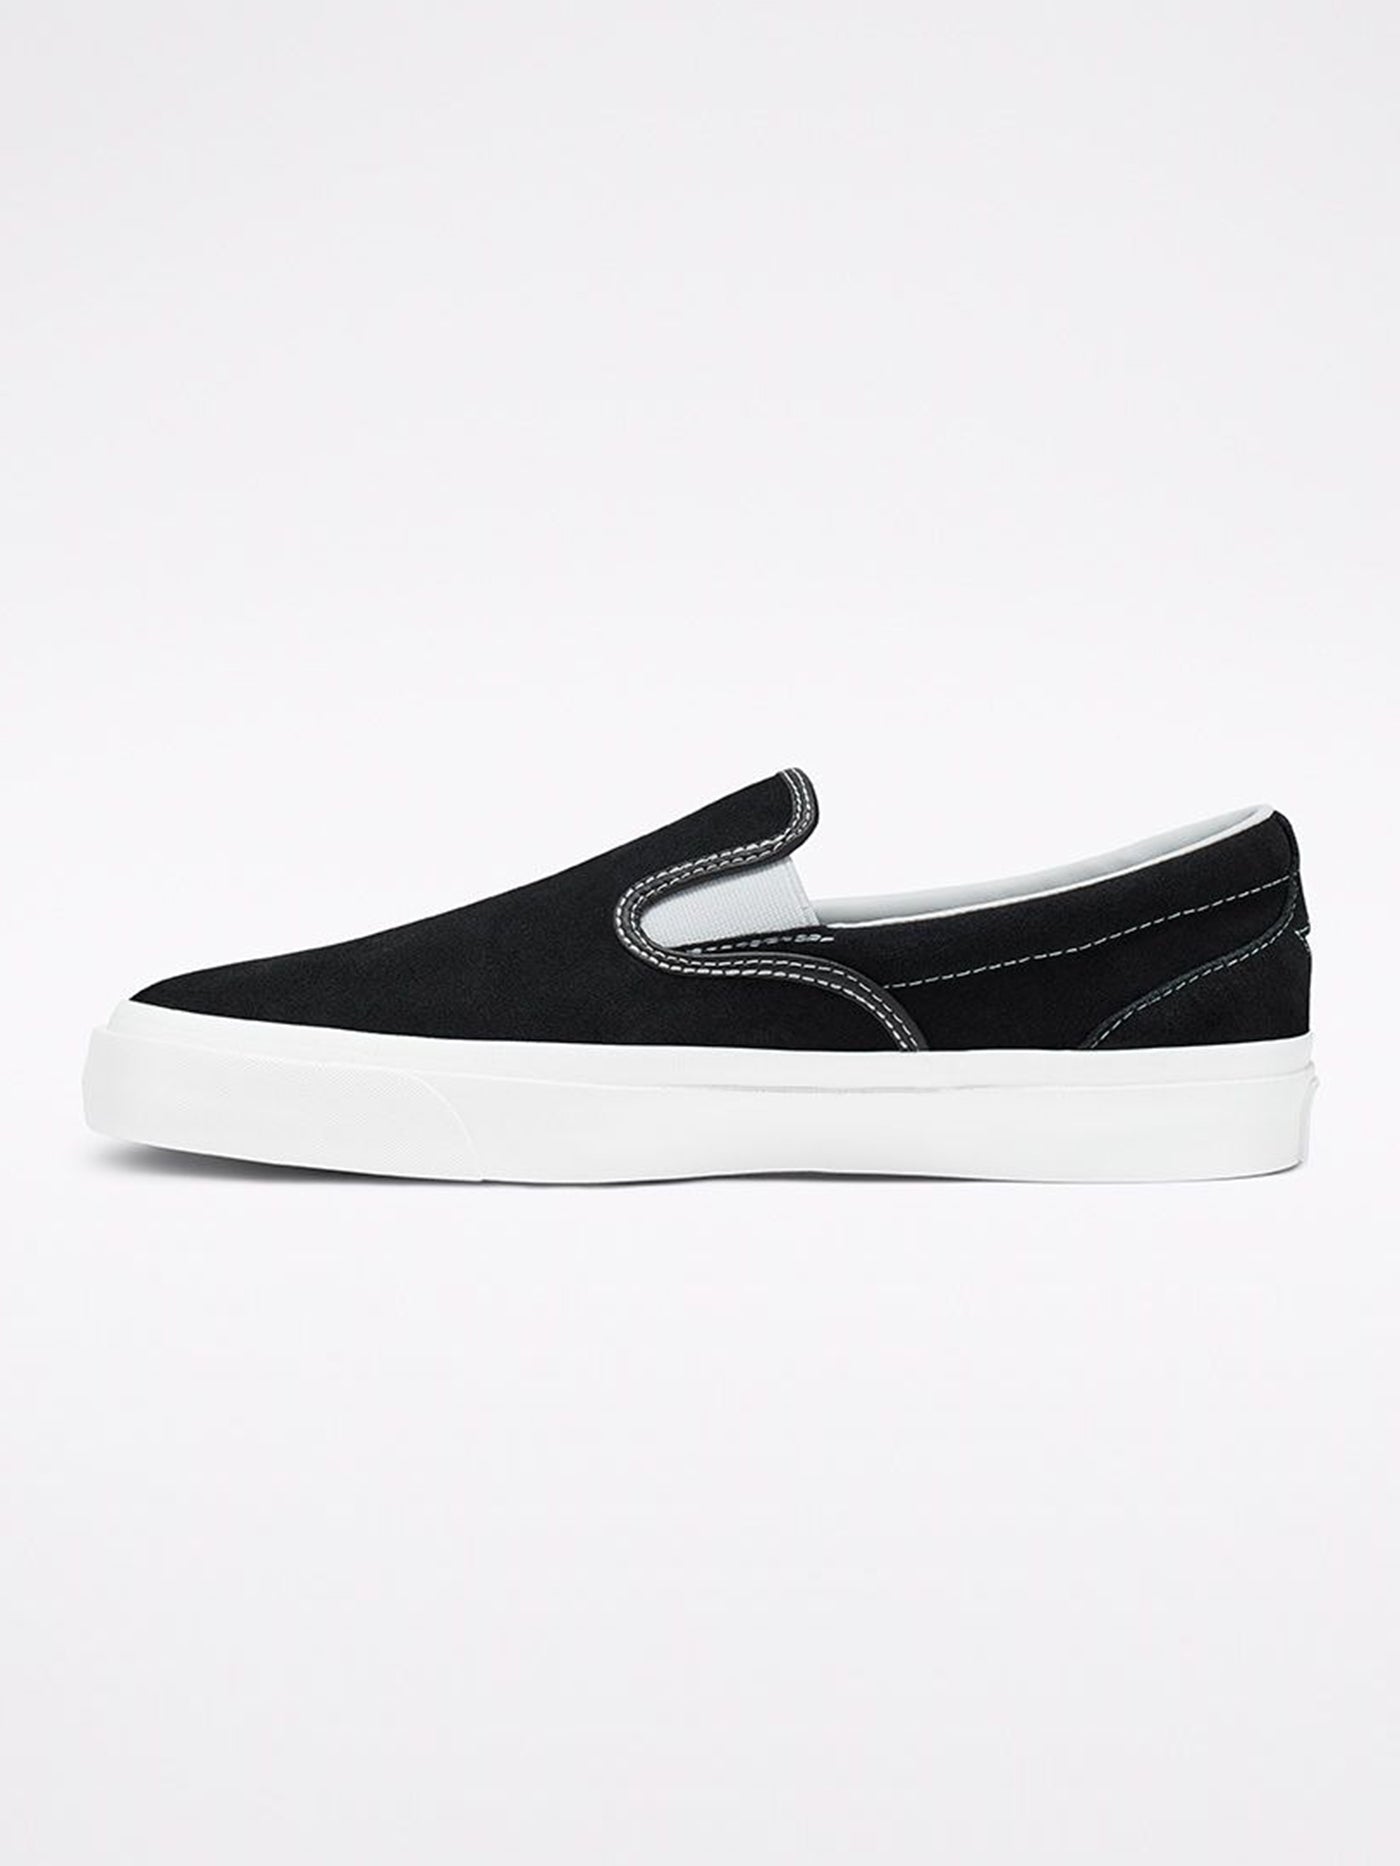 Converse One Star CC Pro Suede Slip-On Black/White Shoes